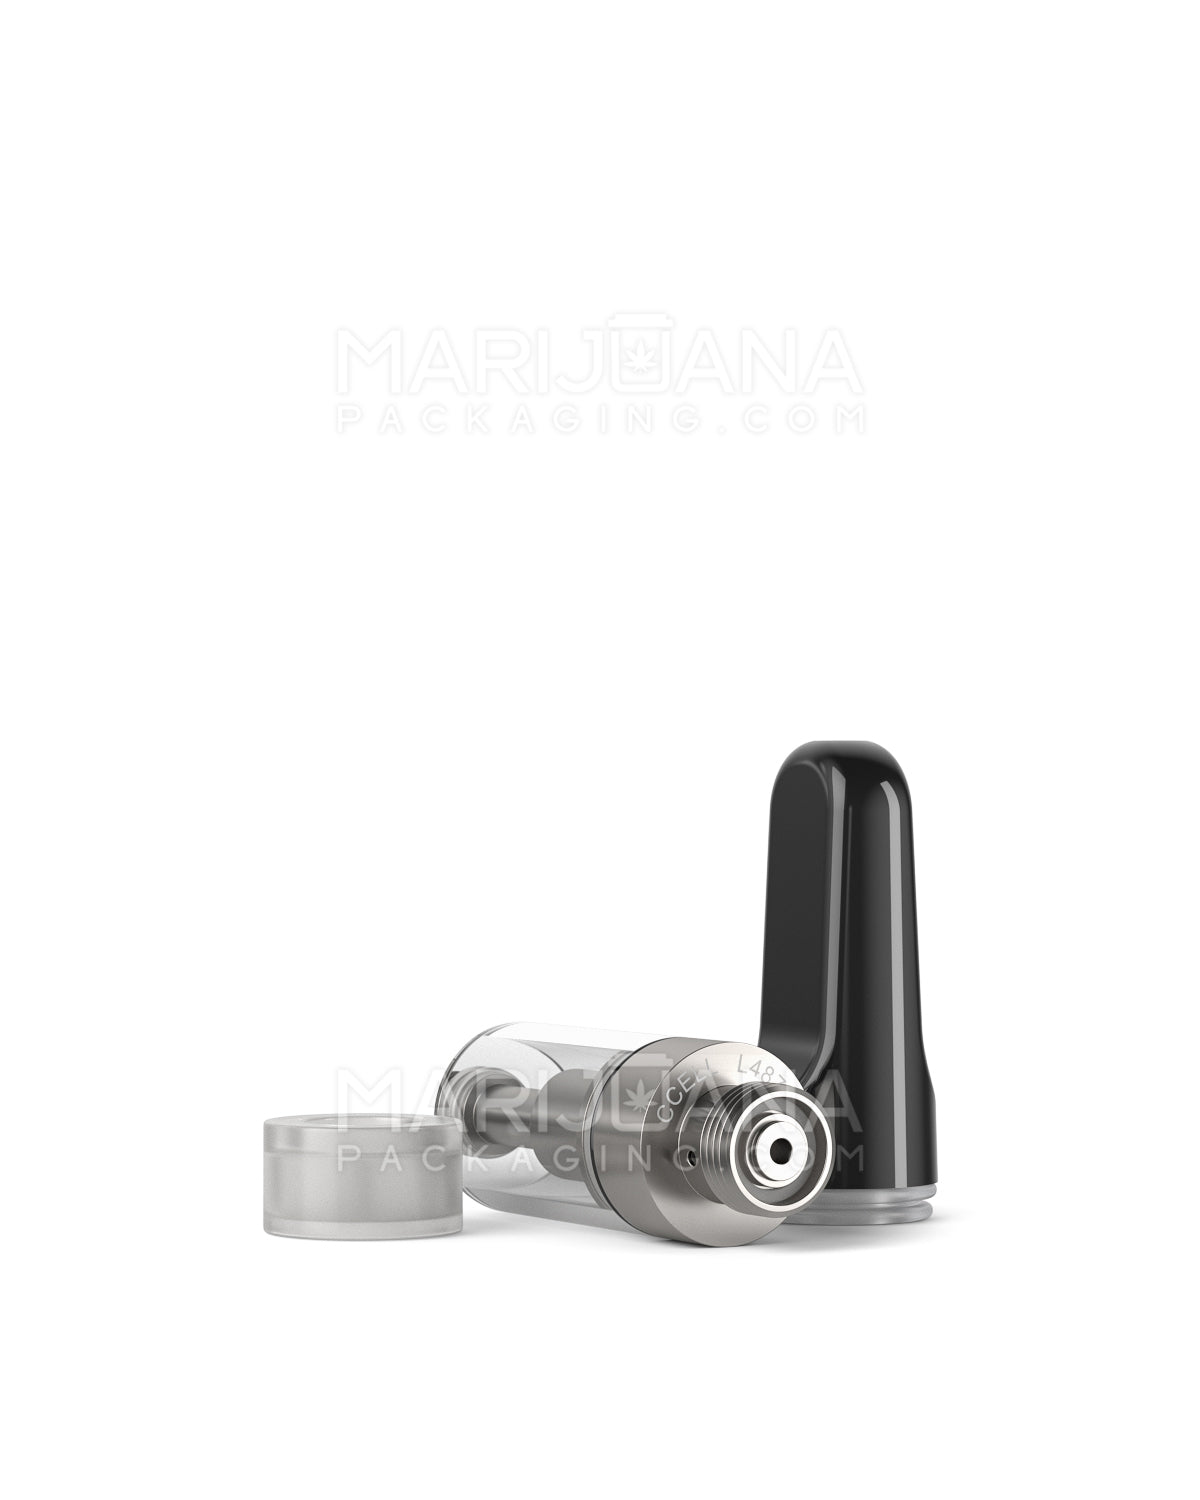 CCELL | Liquid6 Reactor Glass Vape Cartridge with Black Ceramic Mouthpiece | 0.5mL - Screw On - 100 Count - 5